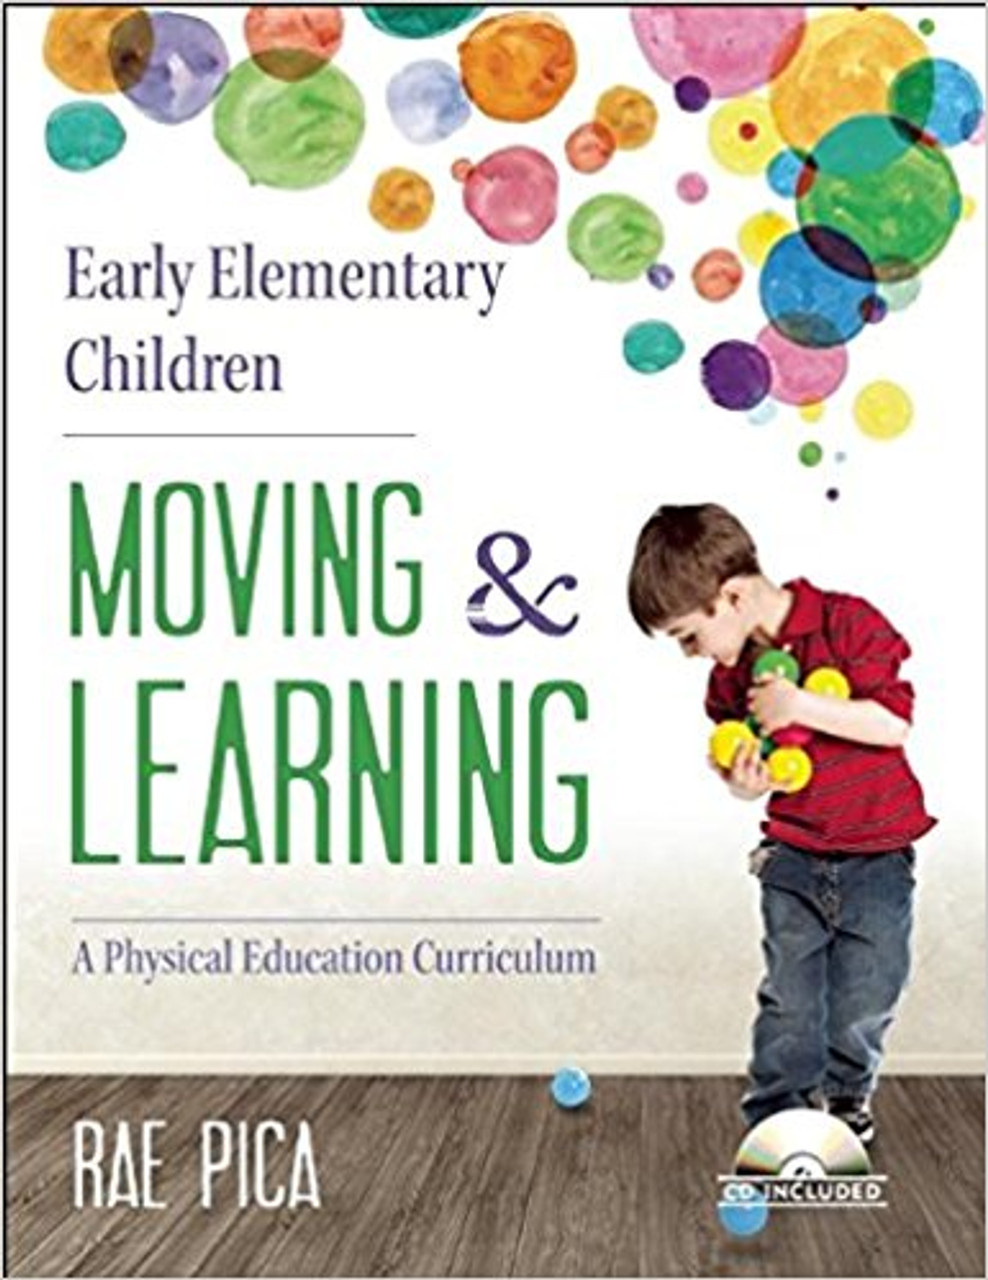 Early Elementary Children: Moving & Learning: A Physical Education Curriculum [With CD (Audio)] by Rae Pica